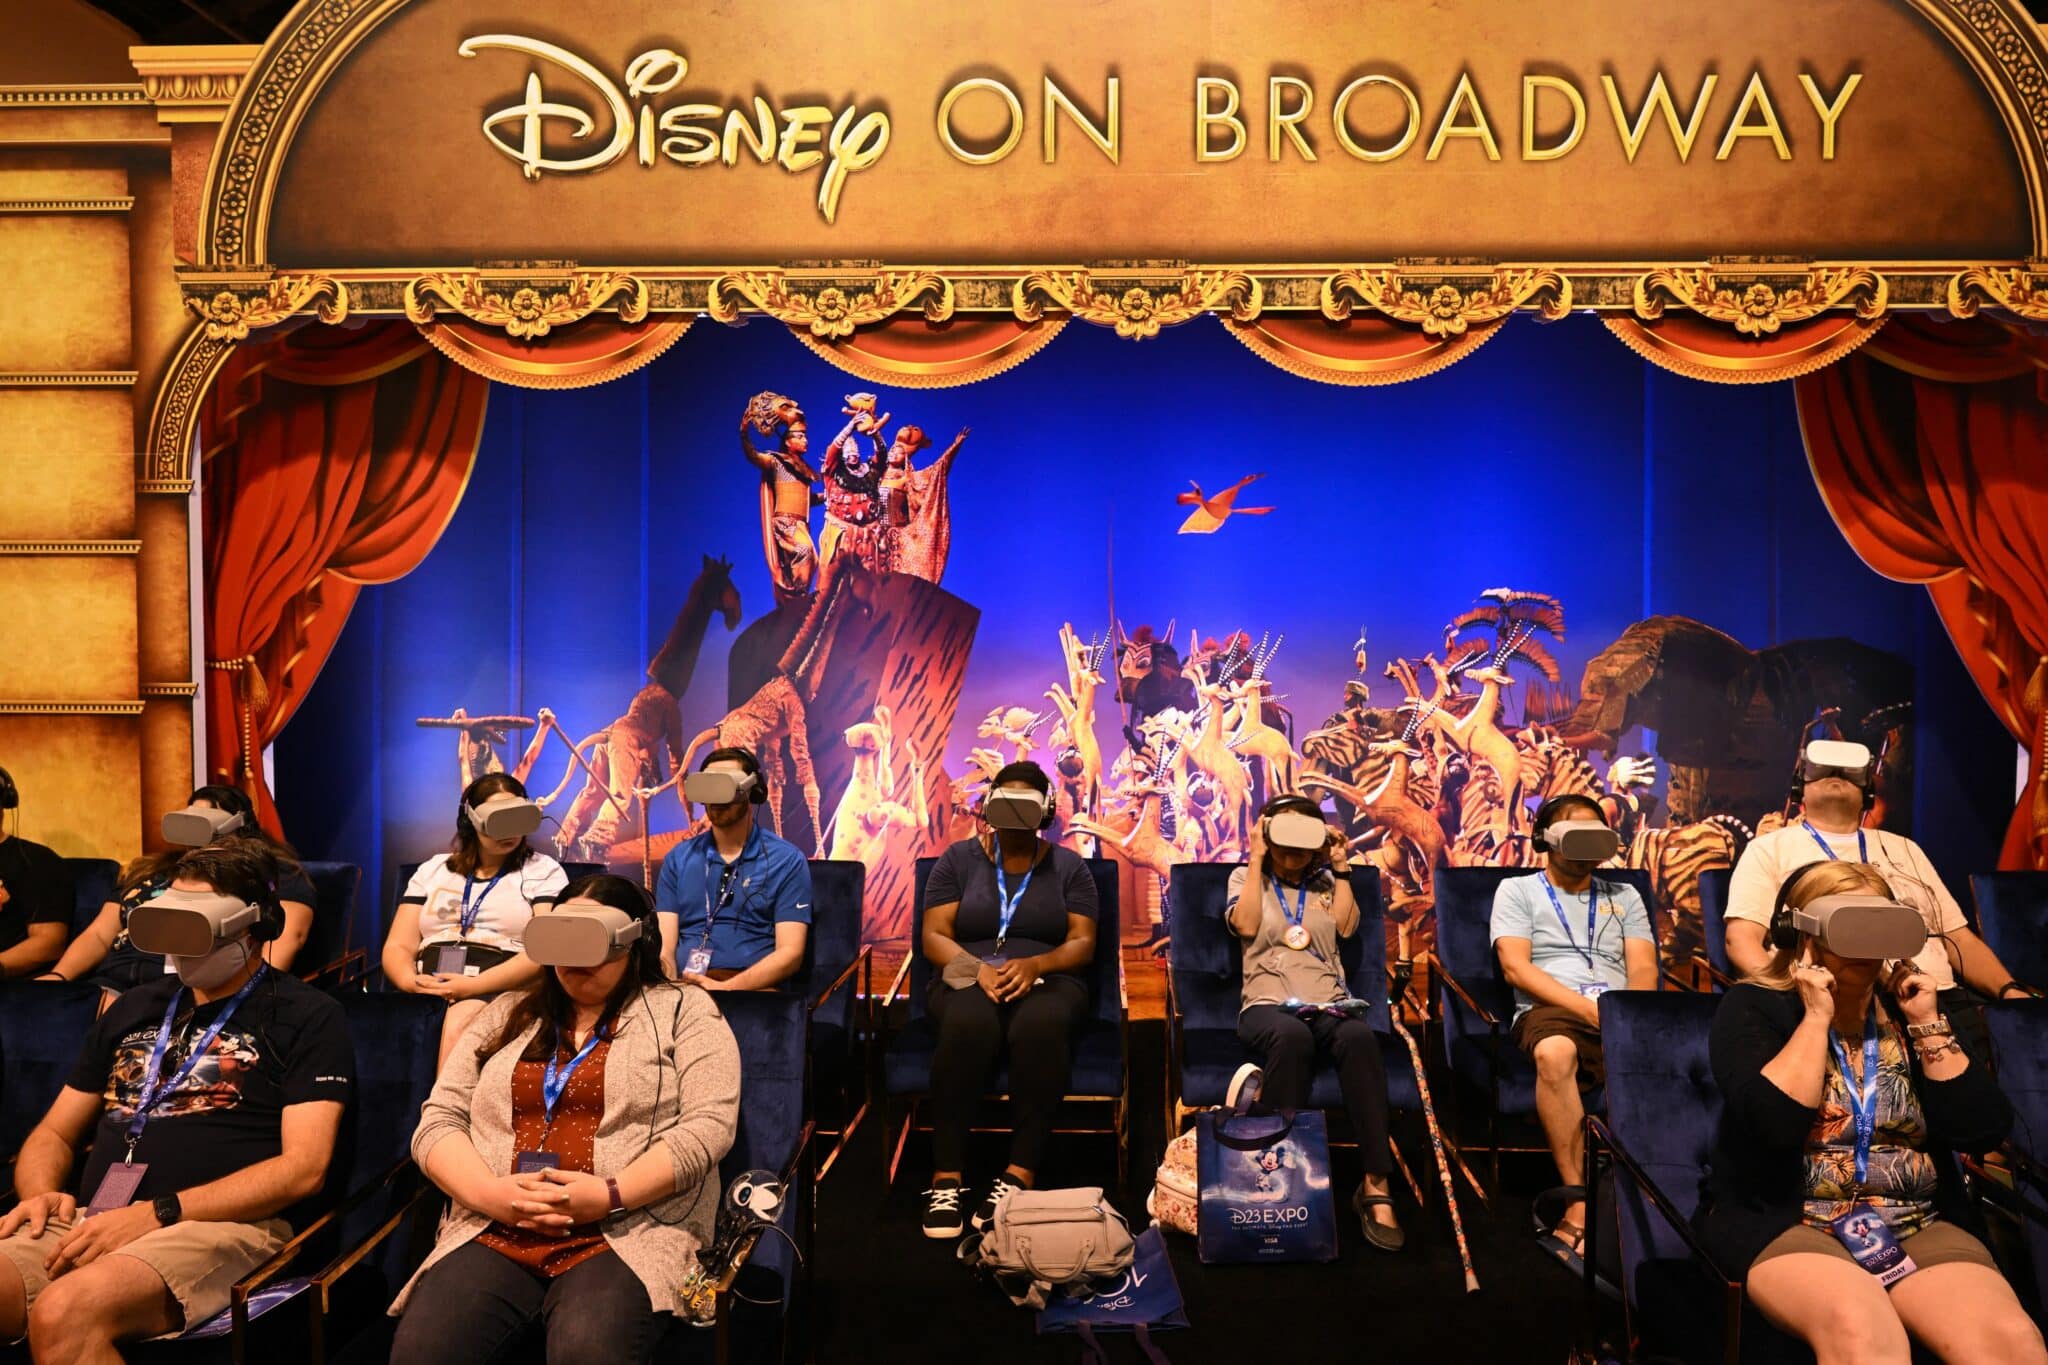 Attendees watch a virtual reality headset presentation of Disney On Broadway shows including The Lion King during the Walt Disney D23 Expo in Anaheim, California on September 9, 2022. (Photo by Patrick T. FALLON / AFP) (Photo by PATRICK T. FALLON/AFP via Getty Images)